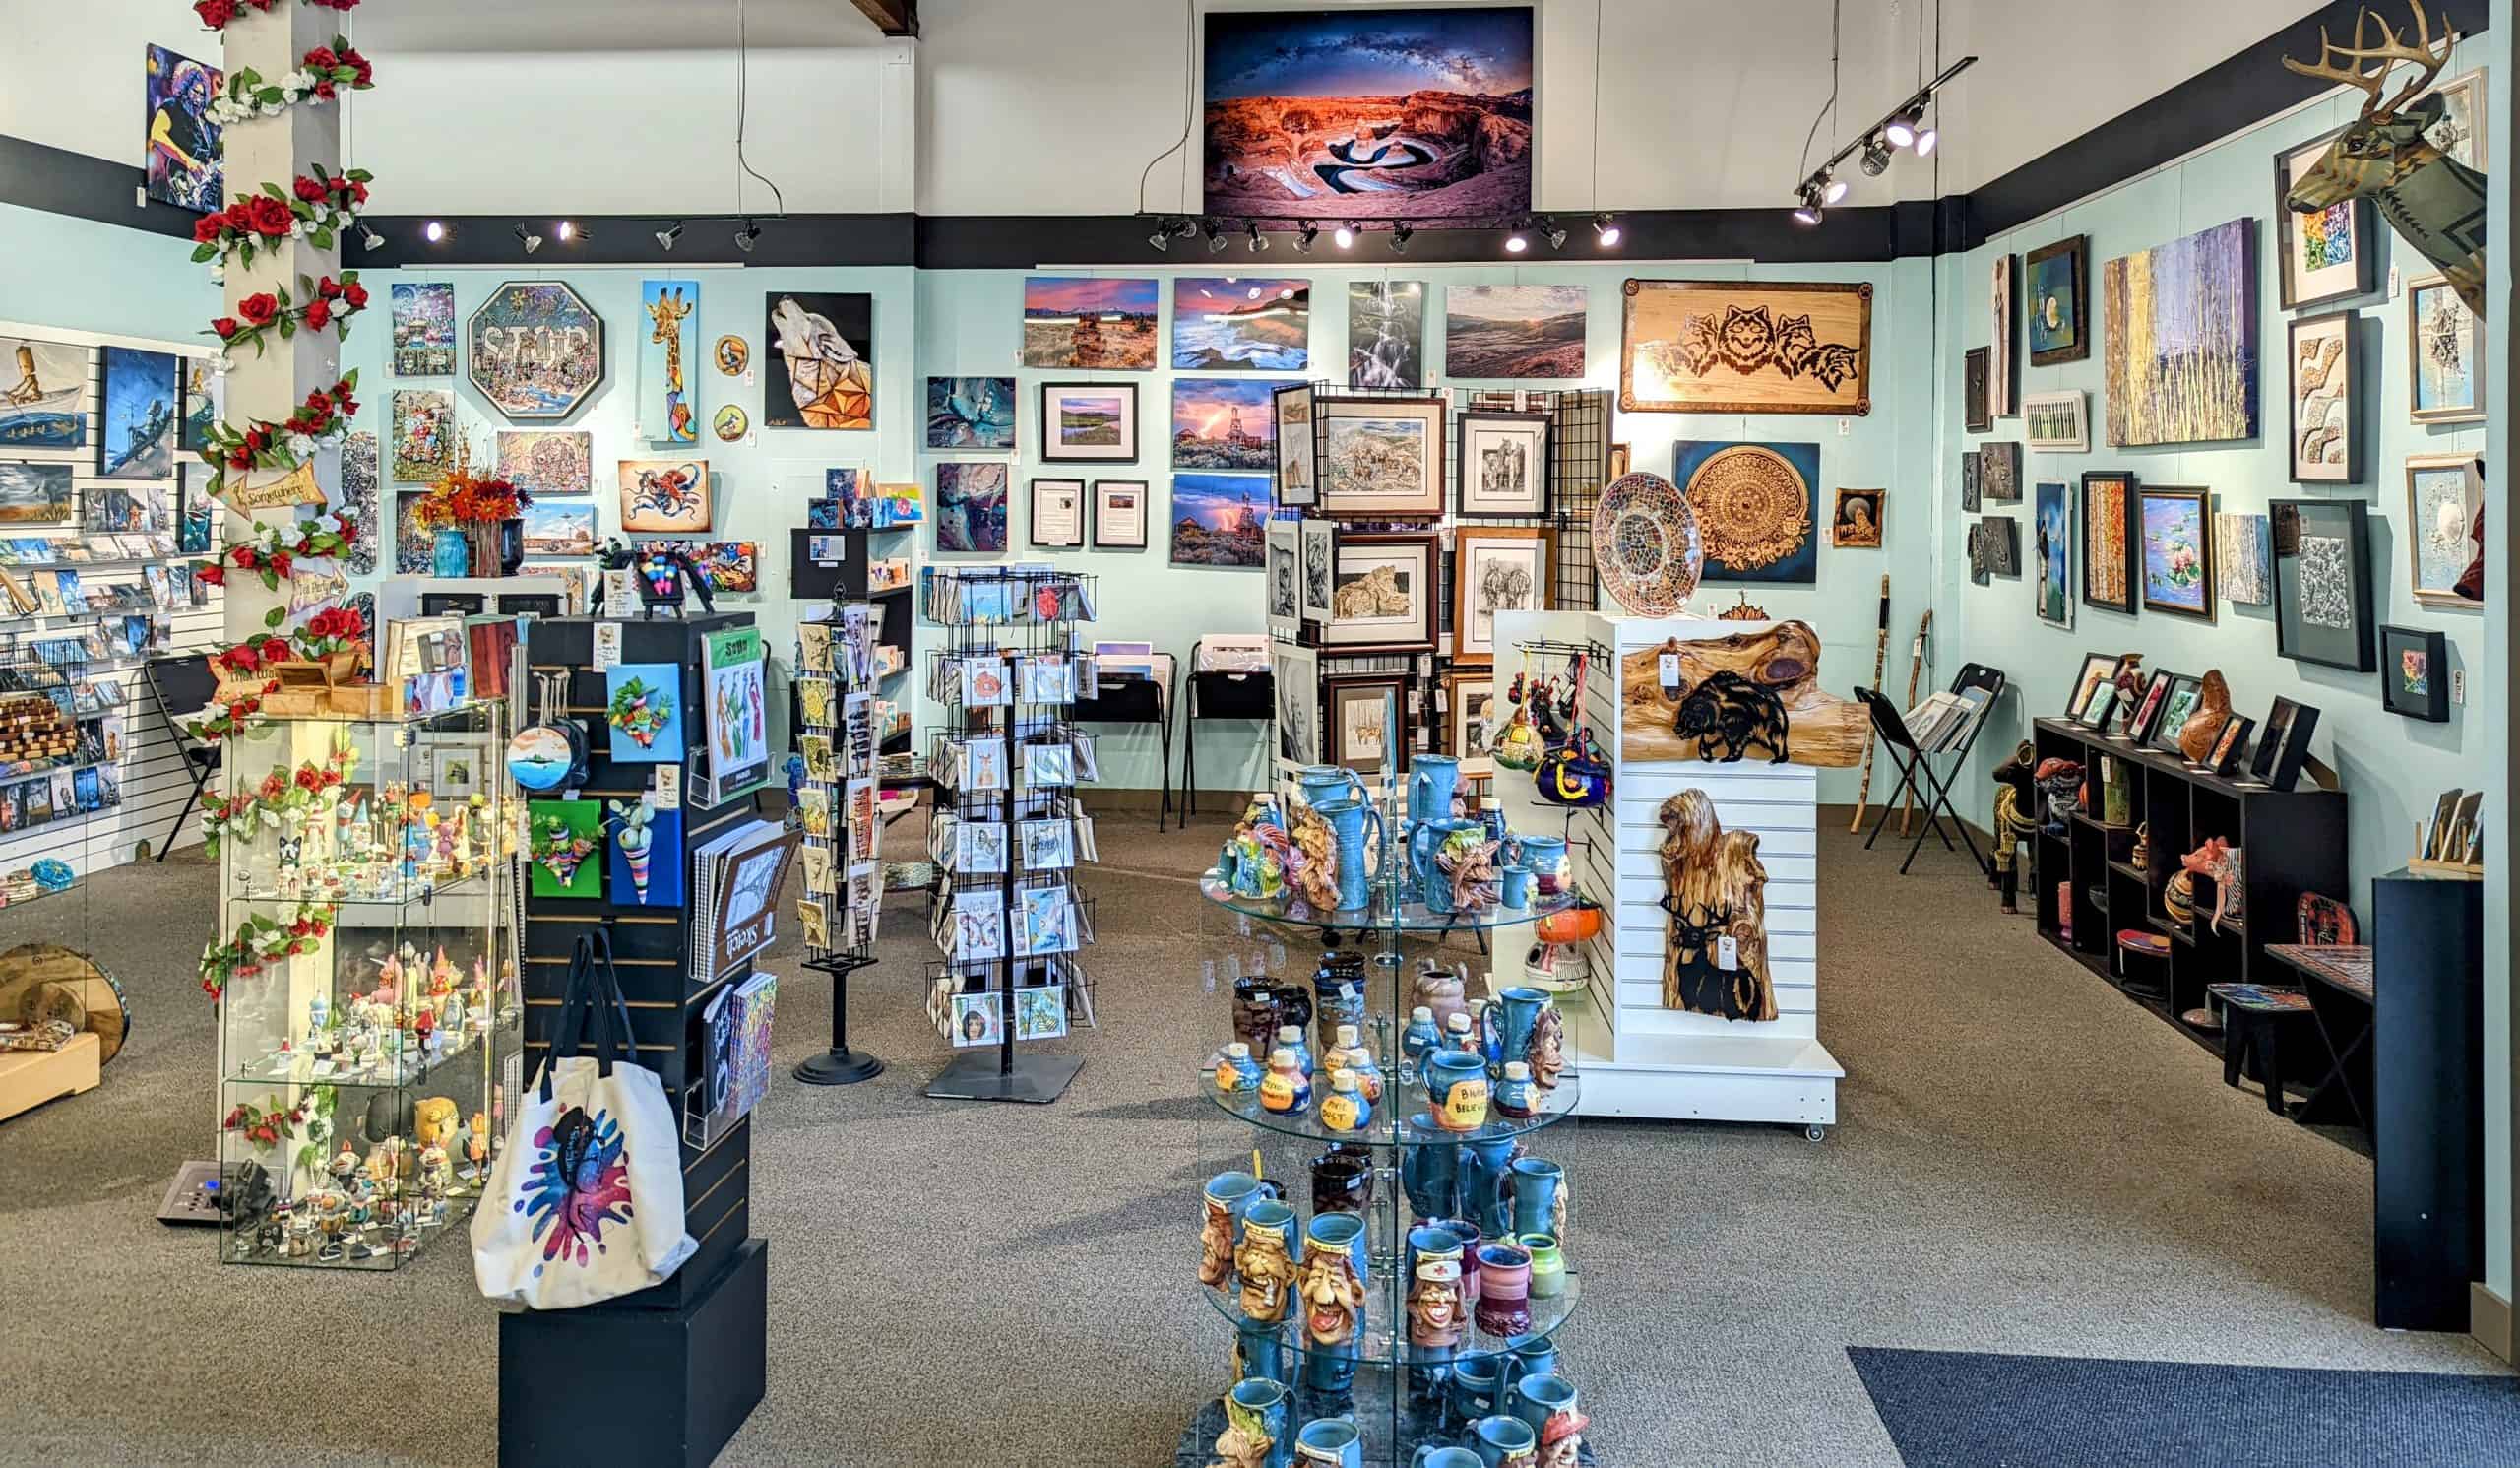 A view of the artwork on display at the Art-O-Maddic gallery in Canby, Ore.